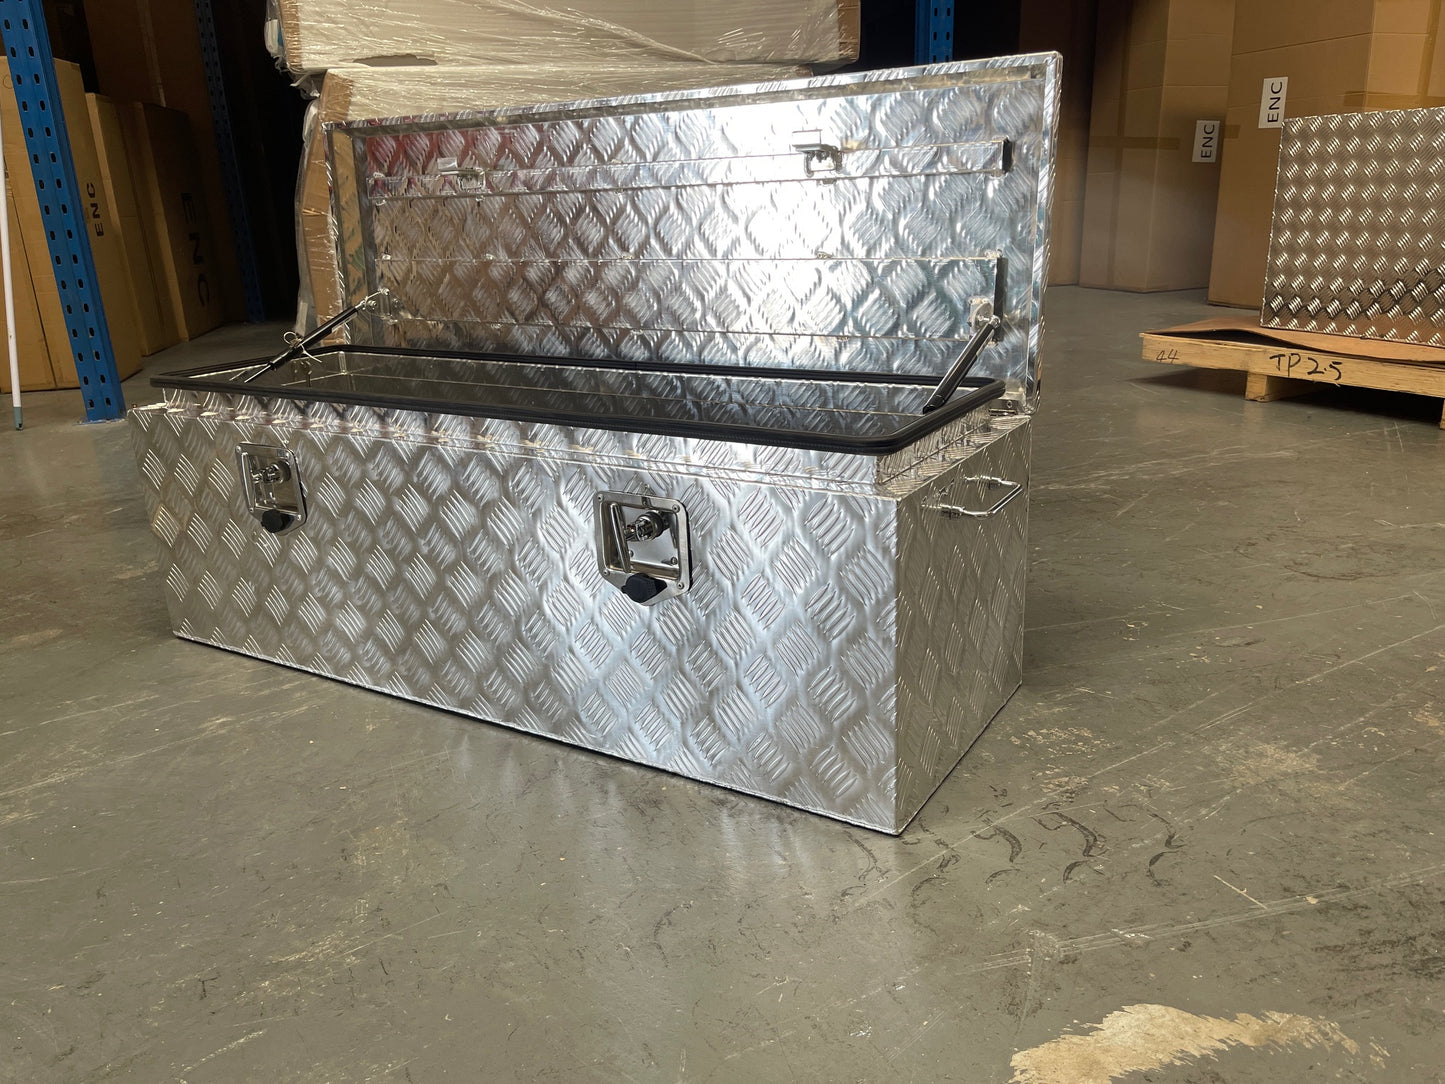 Top Opening Box with Handles - 1200mm Long x 400mm Wide x 400mm High